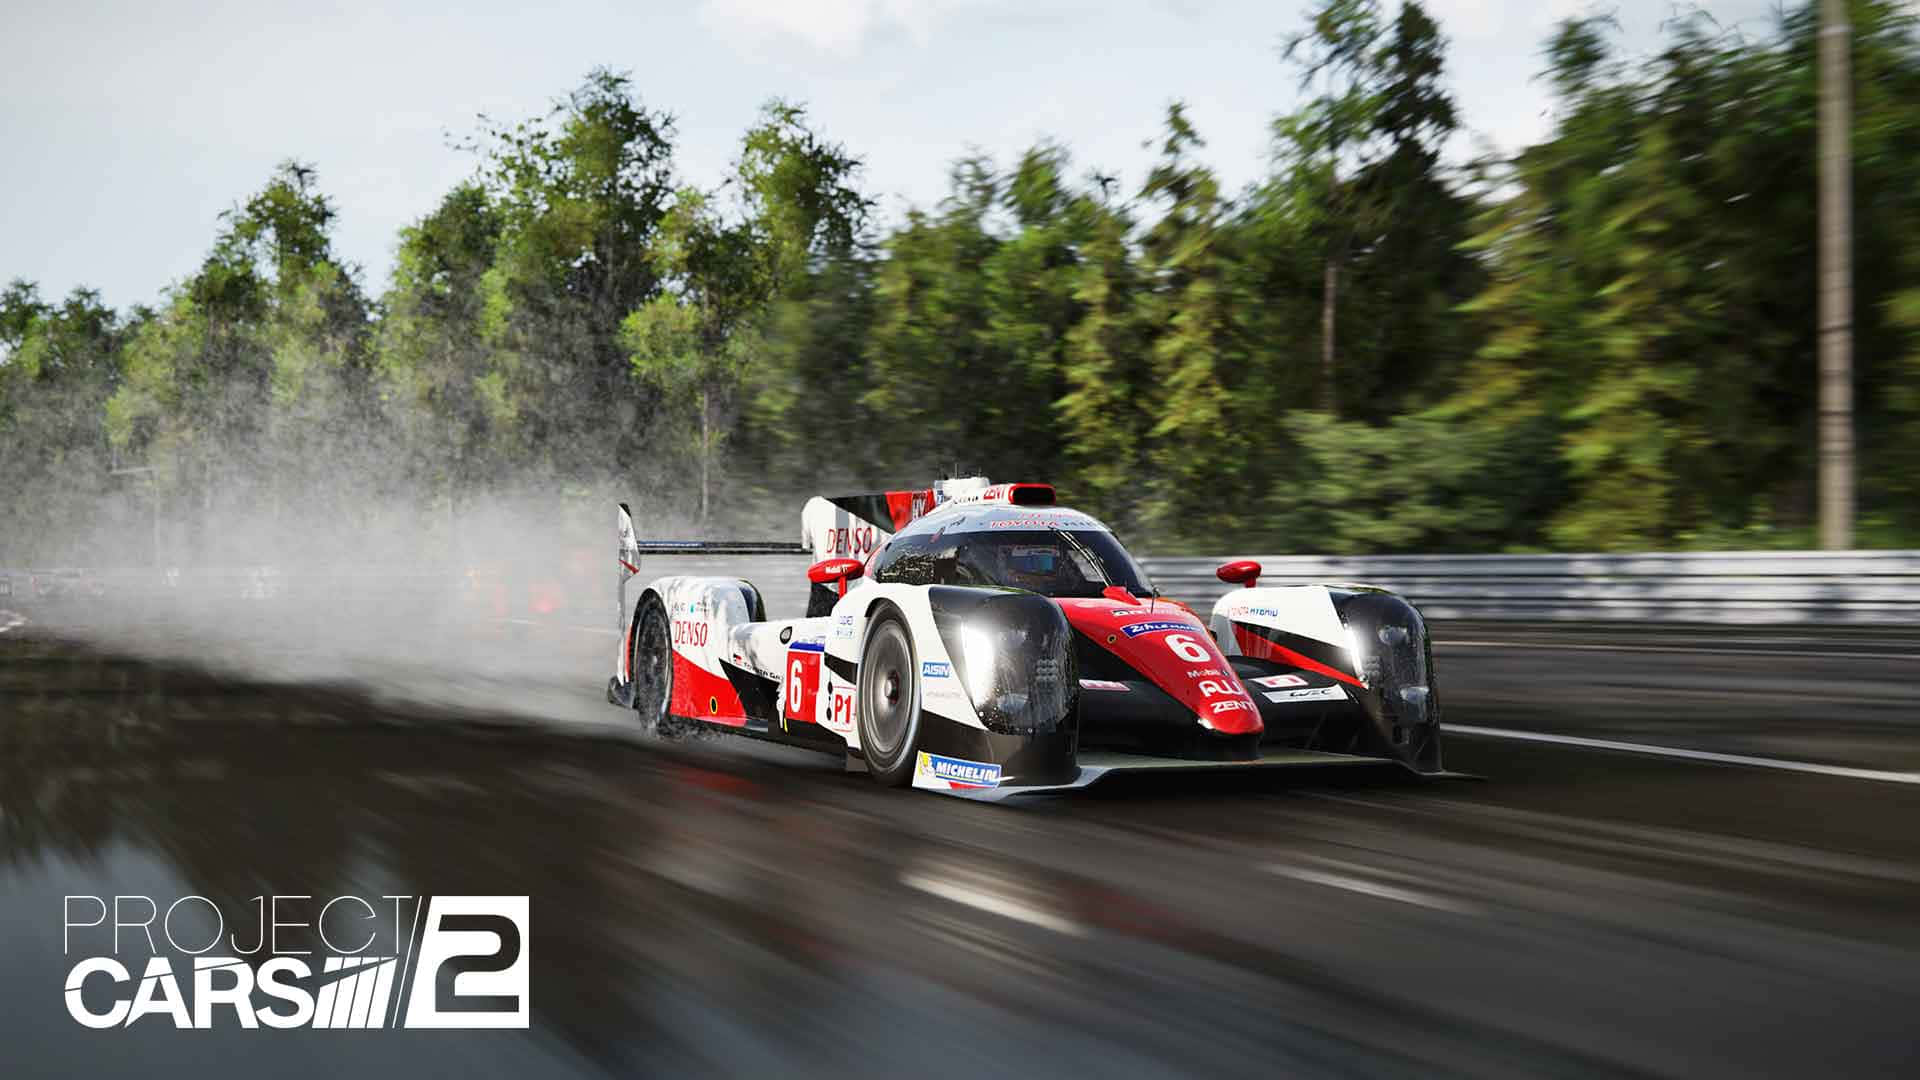 Race anywhere, anytime with HD Project Cars 2.